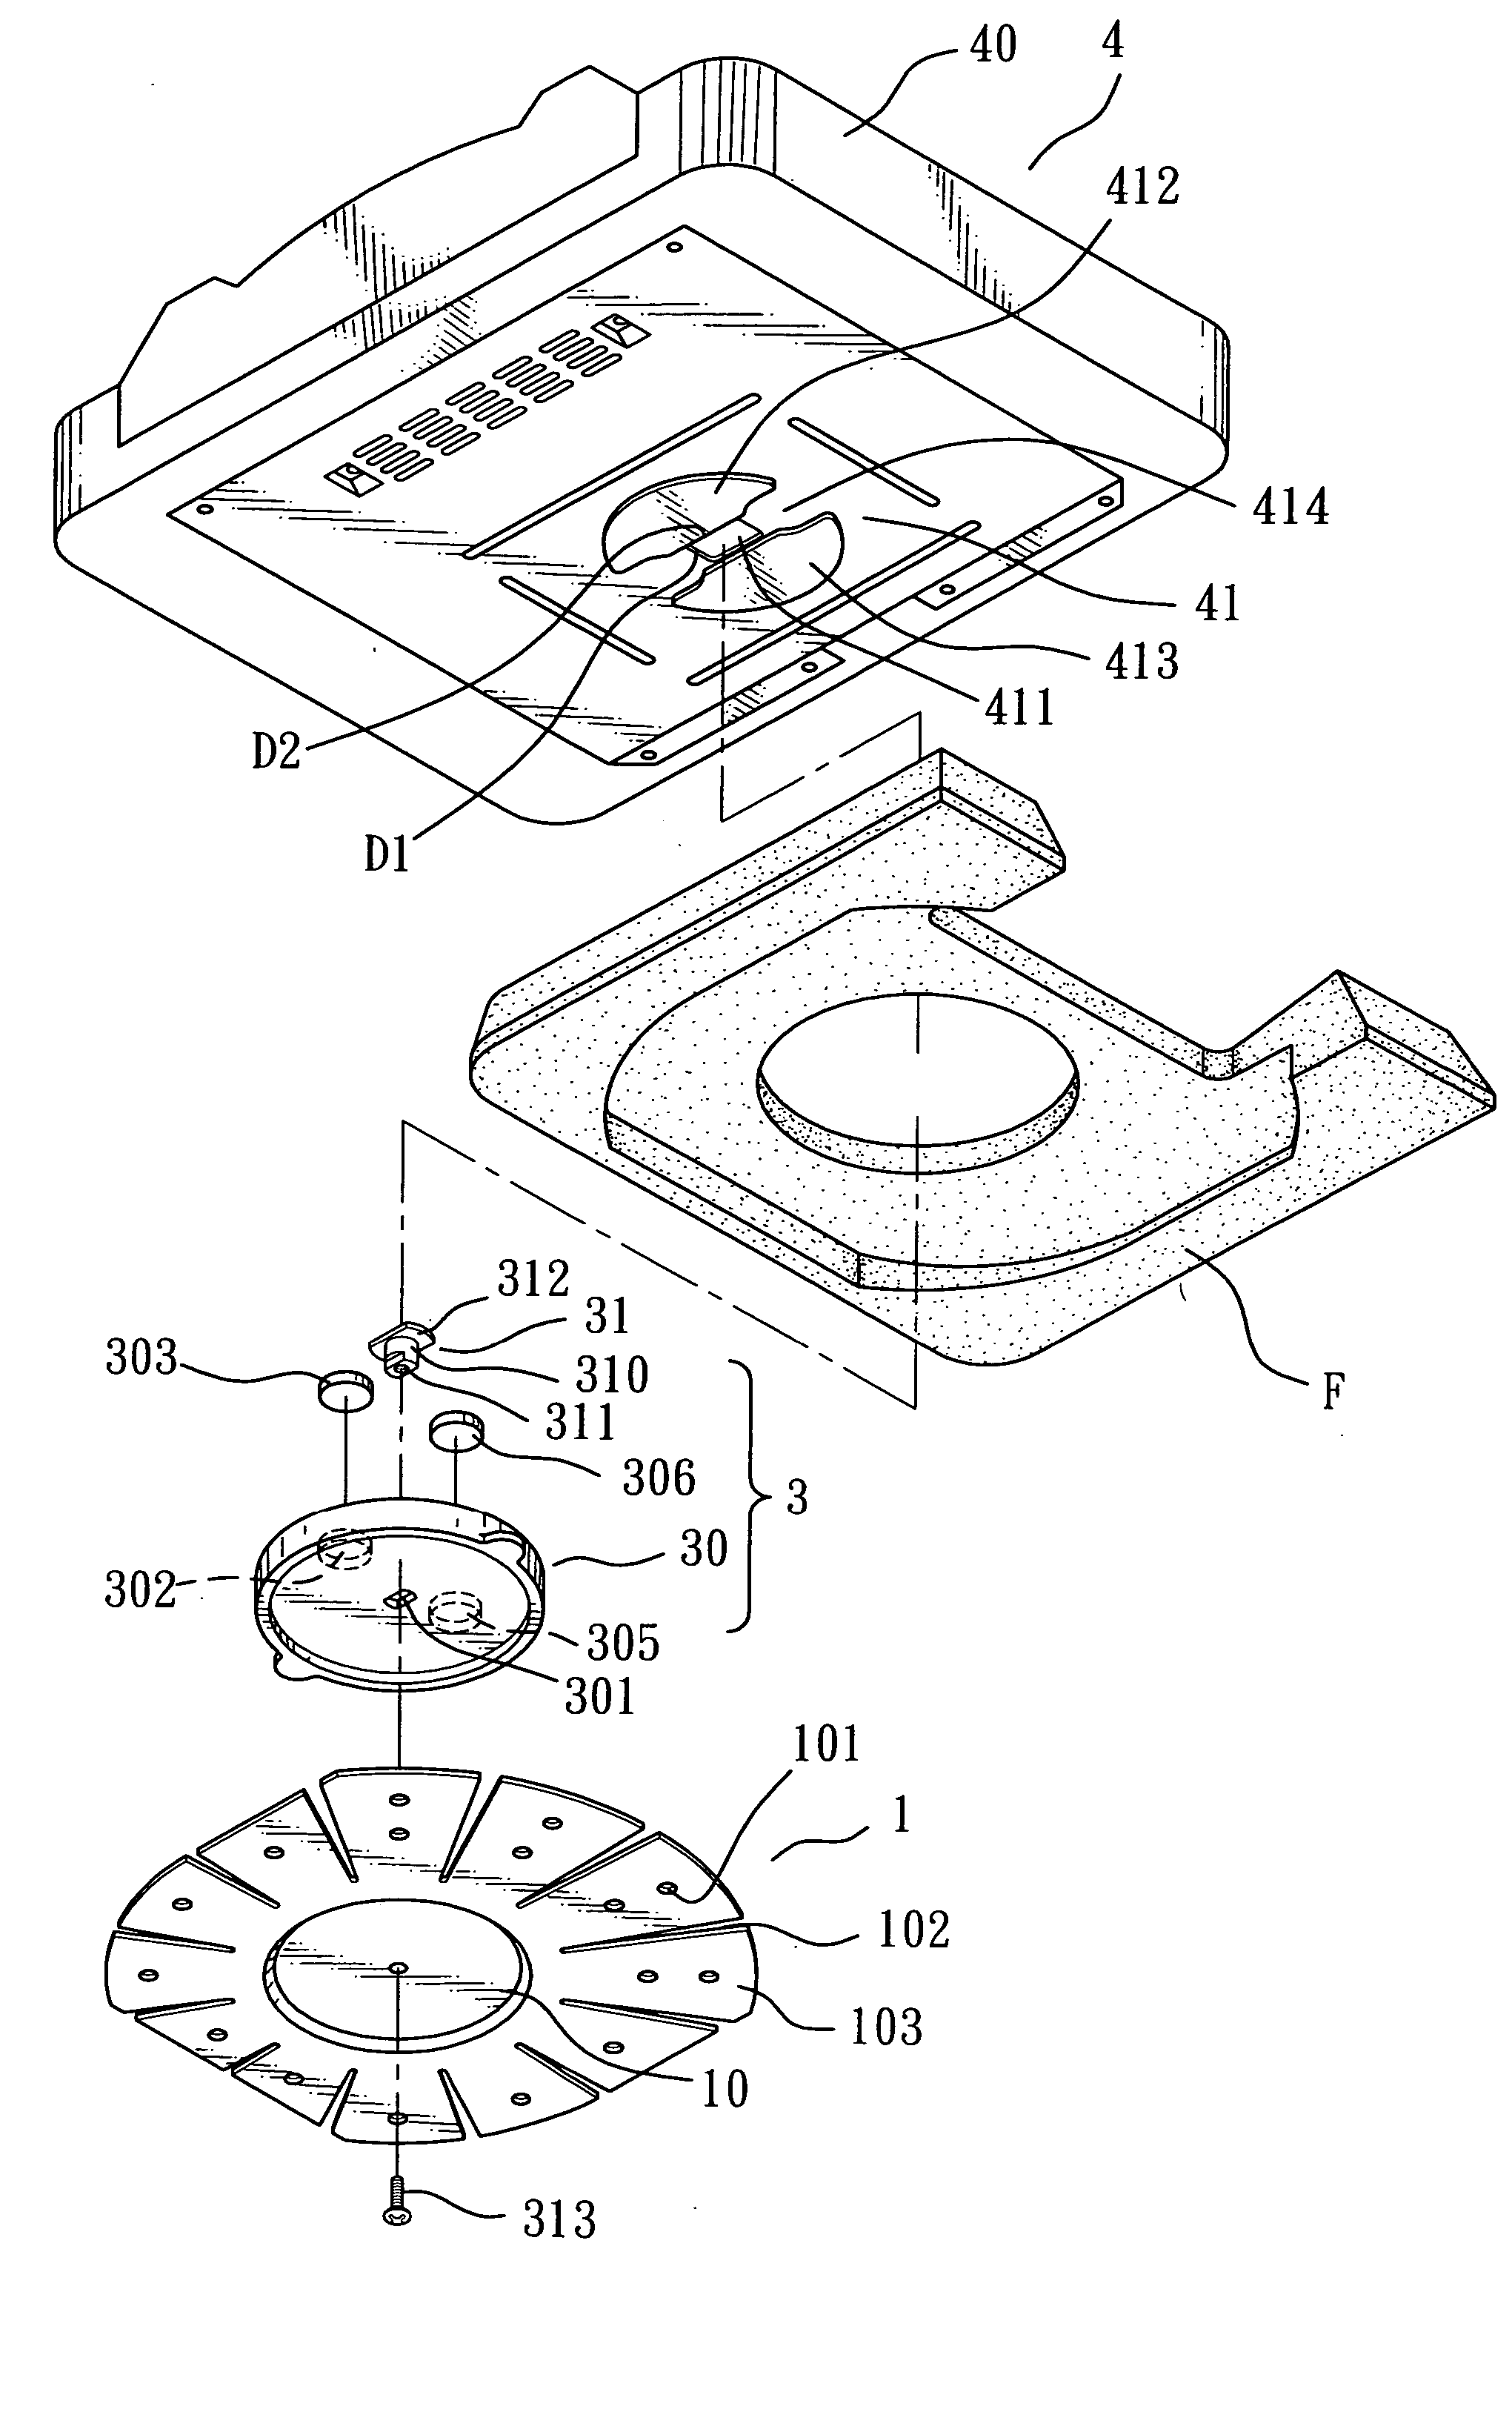 Fastening apparatus for a detachable multimedia player of cars